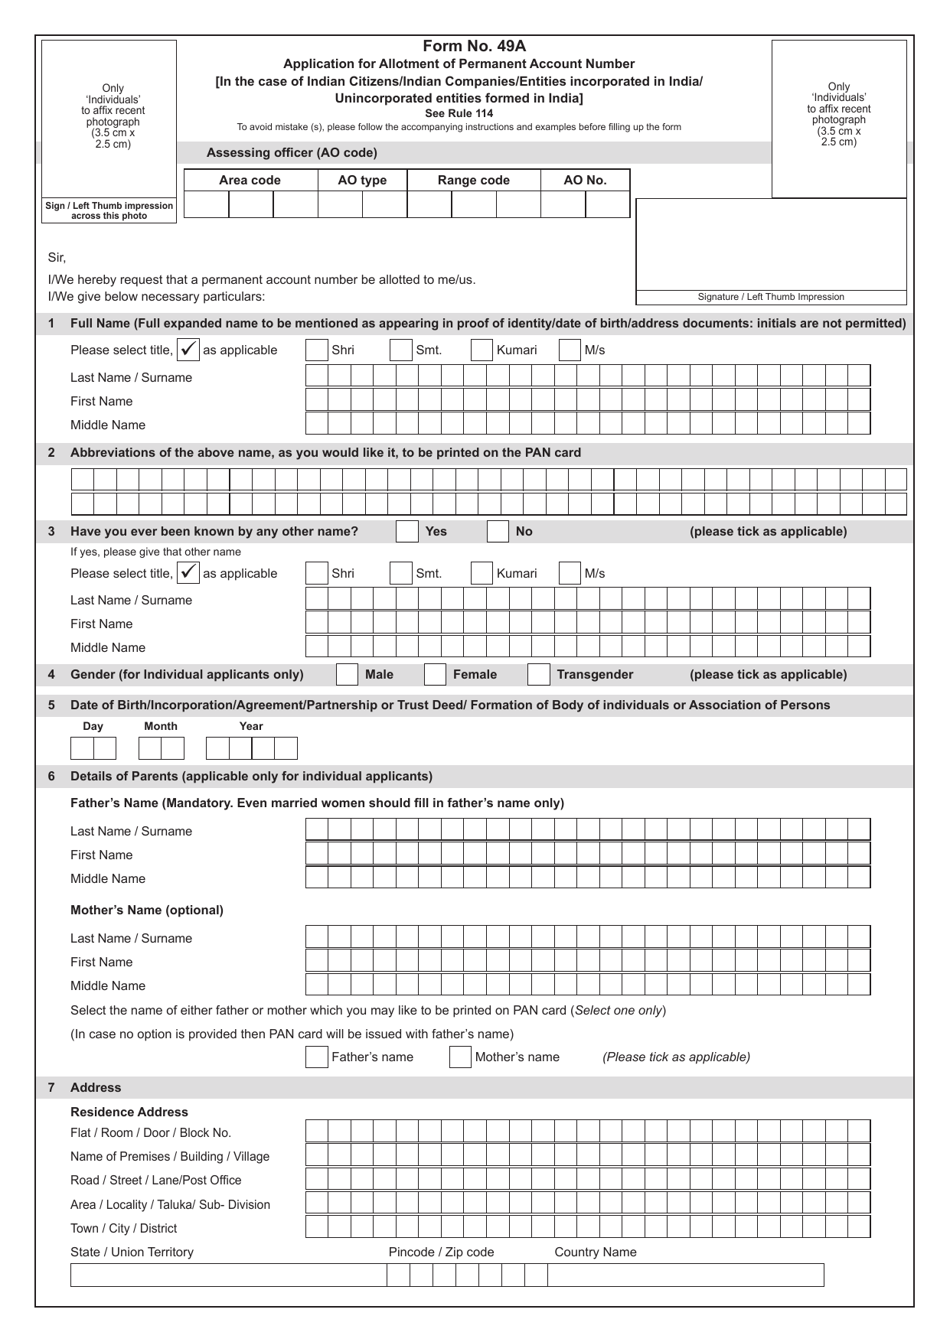 form-49a-fill-out-sign-online-and-download-printable-pdf-india